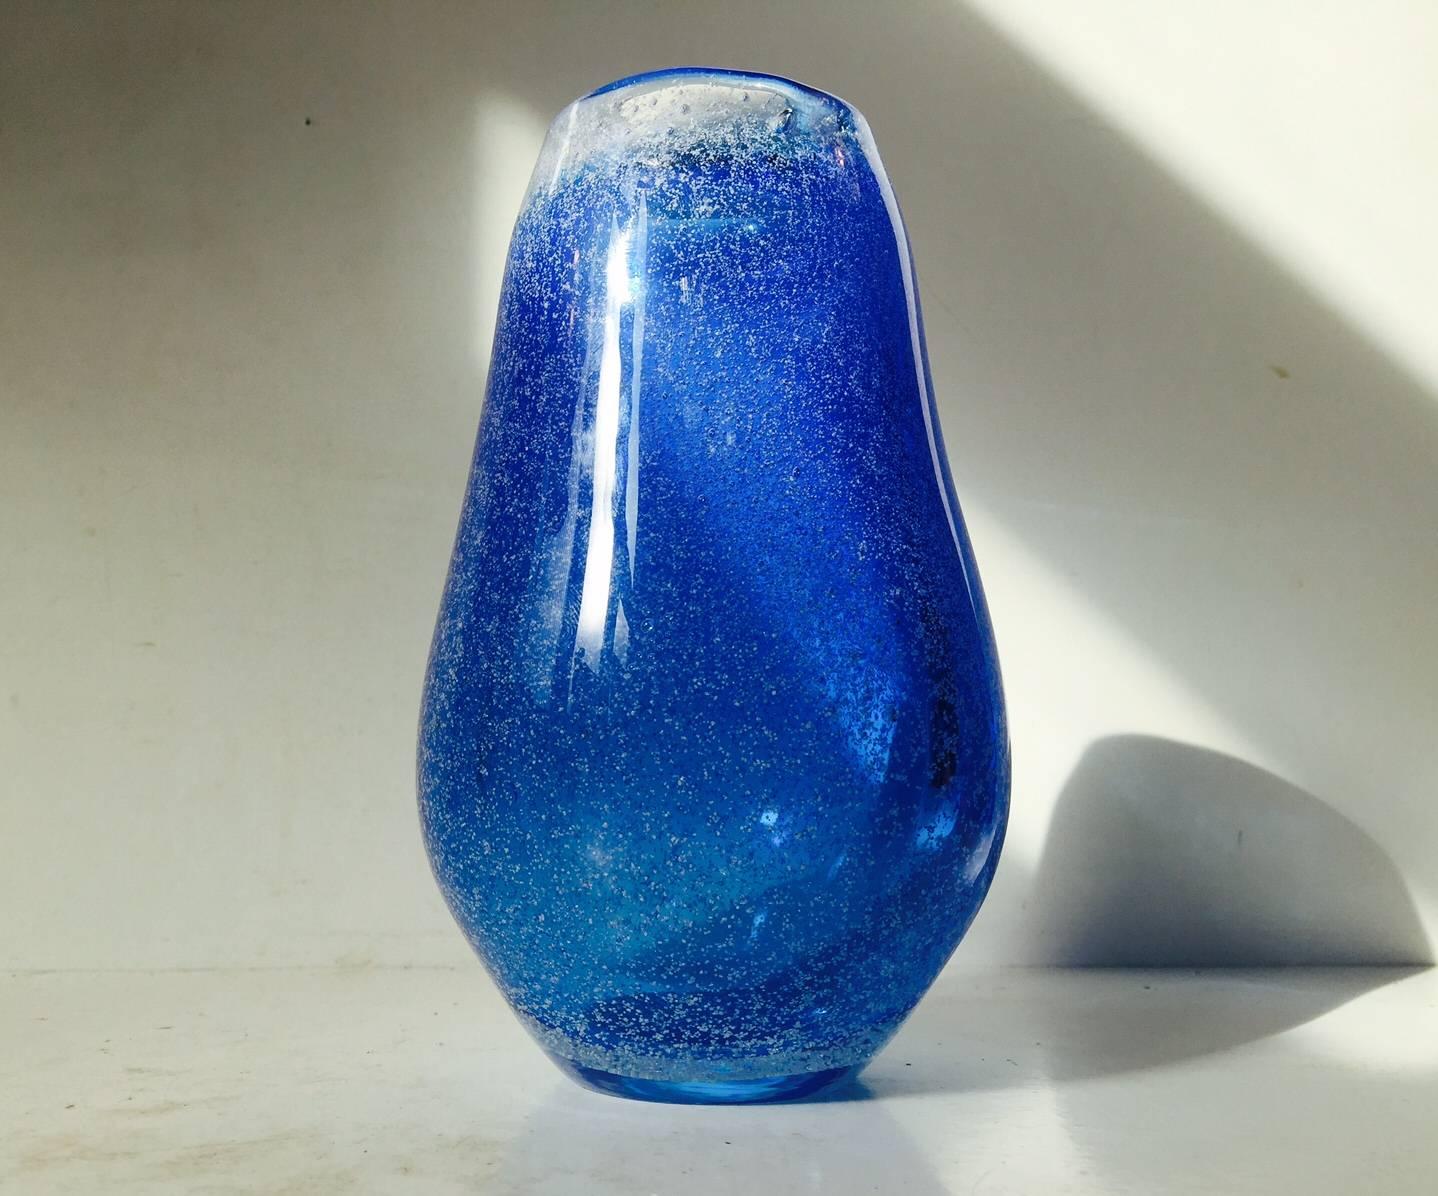 This cloudy blue galaxy art glass vase was by Bertil Vallien. It’s manufactured during the 1970s by Kosta Boda, Sweden. The cloudy spotted galaxy-like effect is created with air and white ash. Measures: Height 18.5 cm (7.3 inches), weight